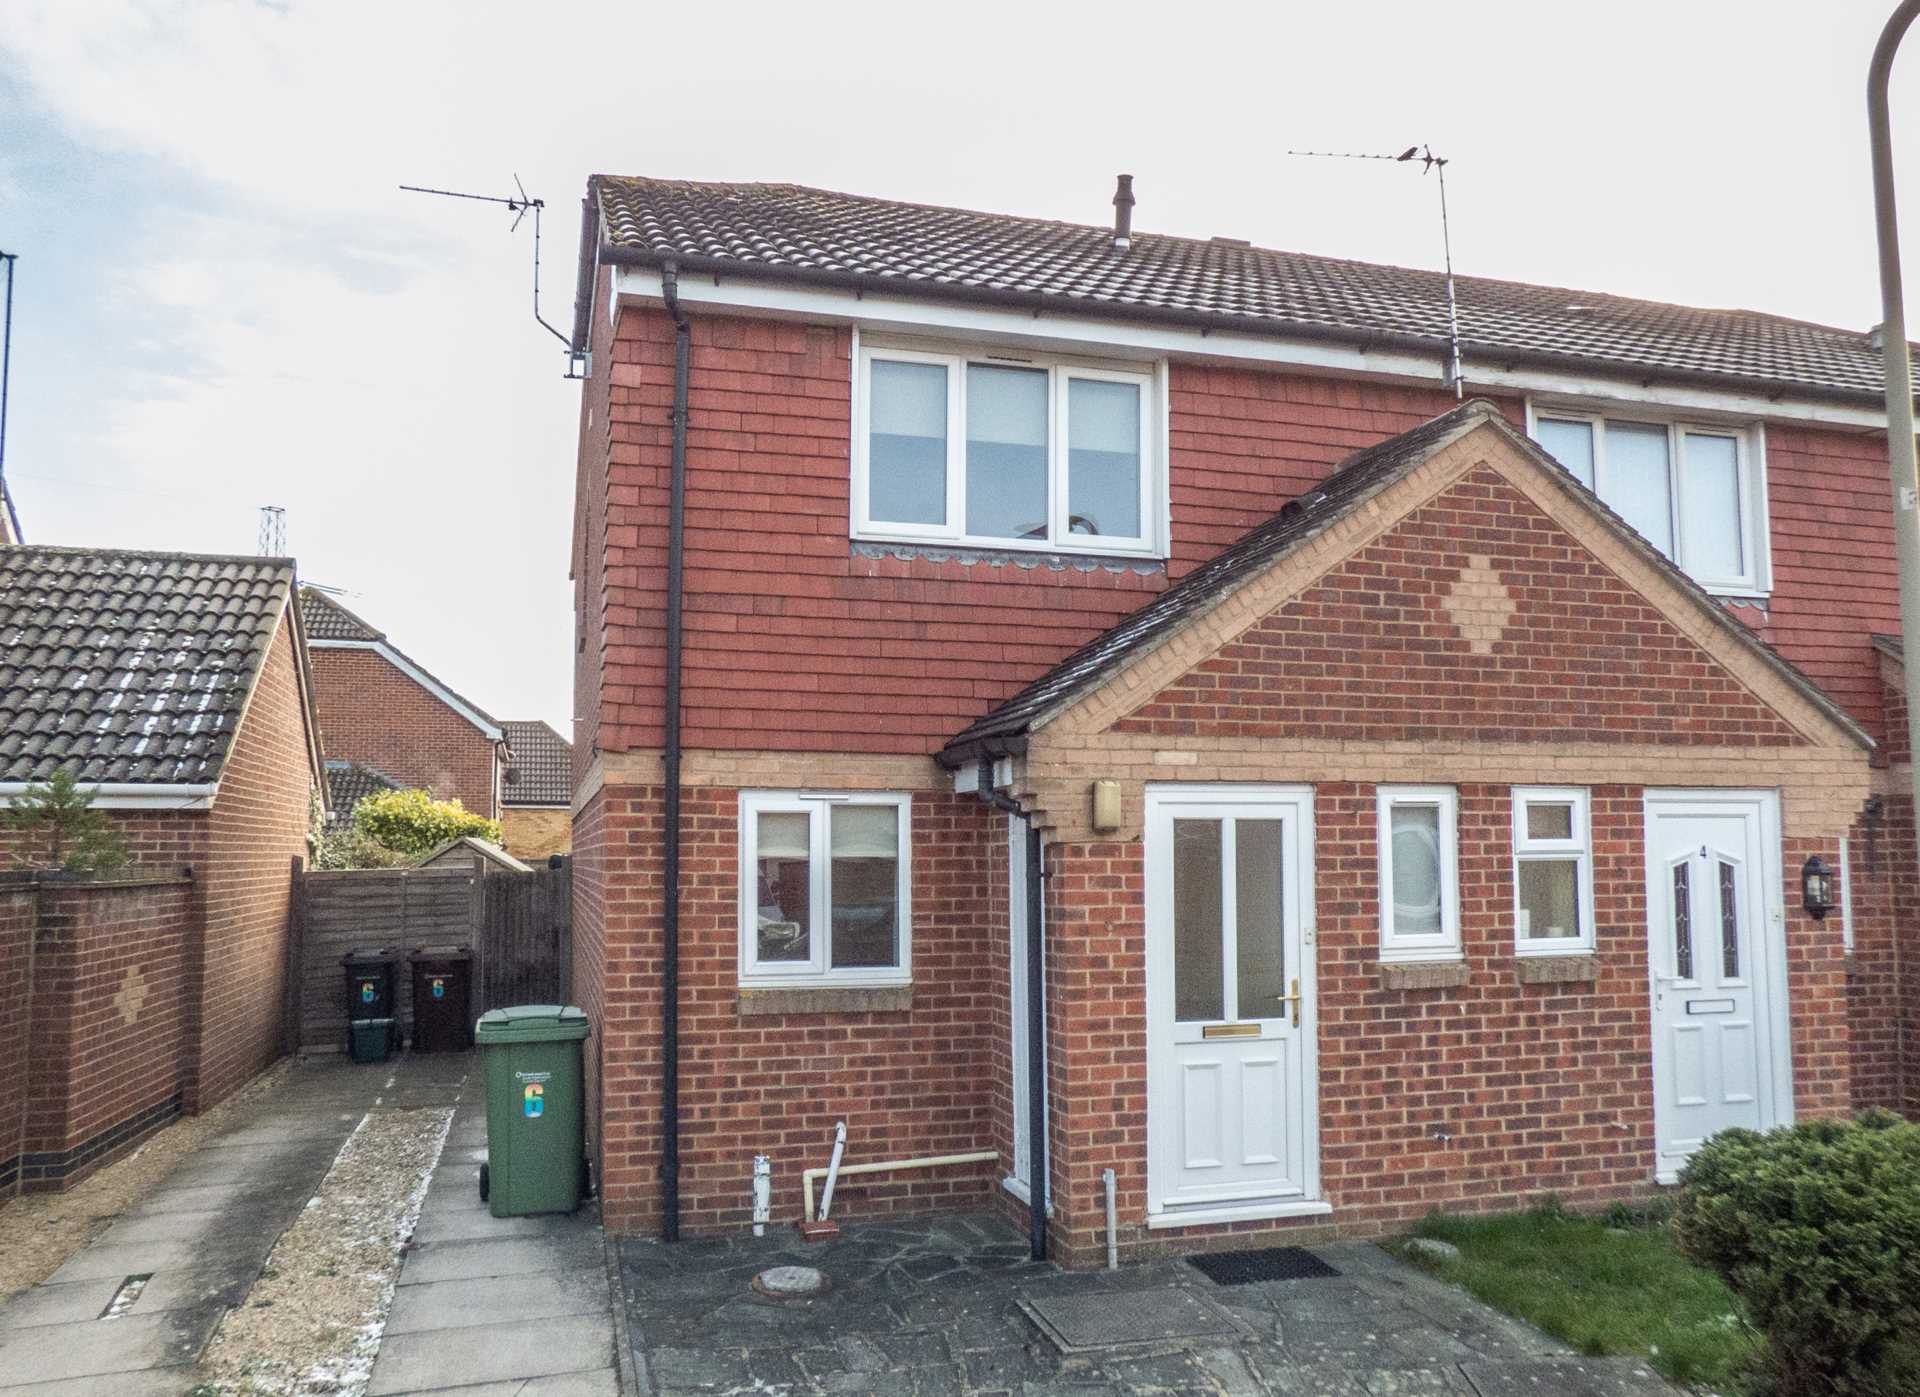 2 bed House (unspecified) for rent in Didcot. From Abbey Group Property Management Ltd